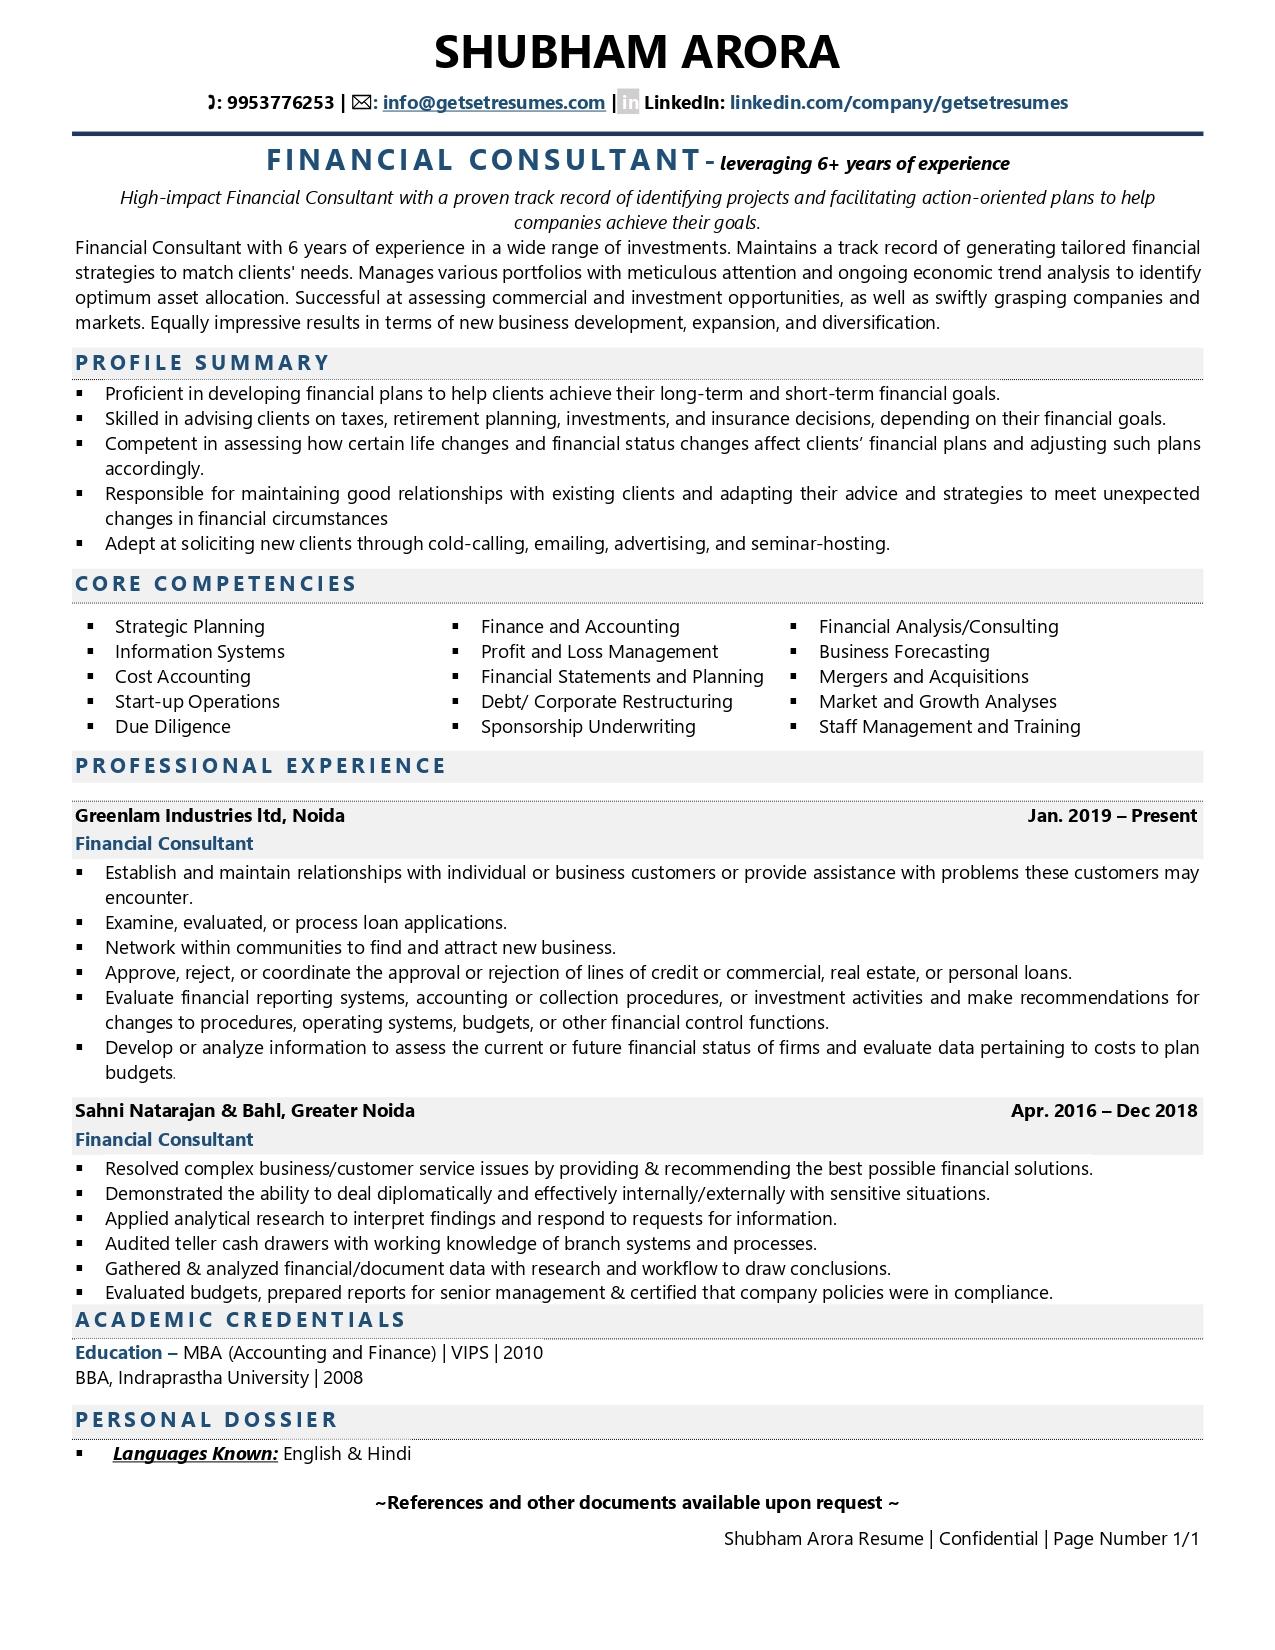 Financial Consultant Resume Examples Template (with job winning tips)